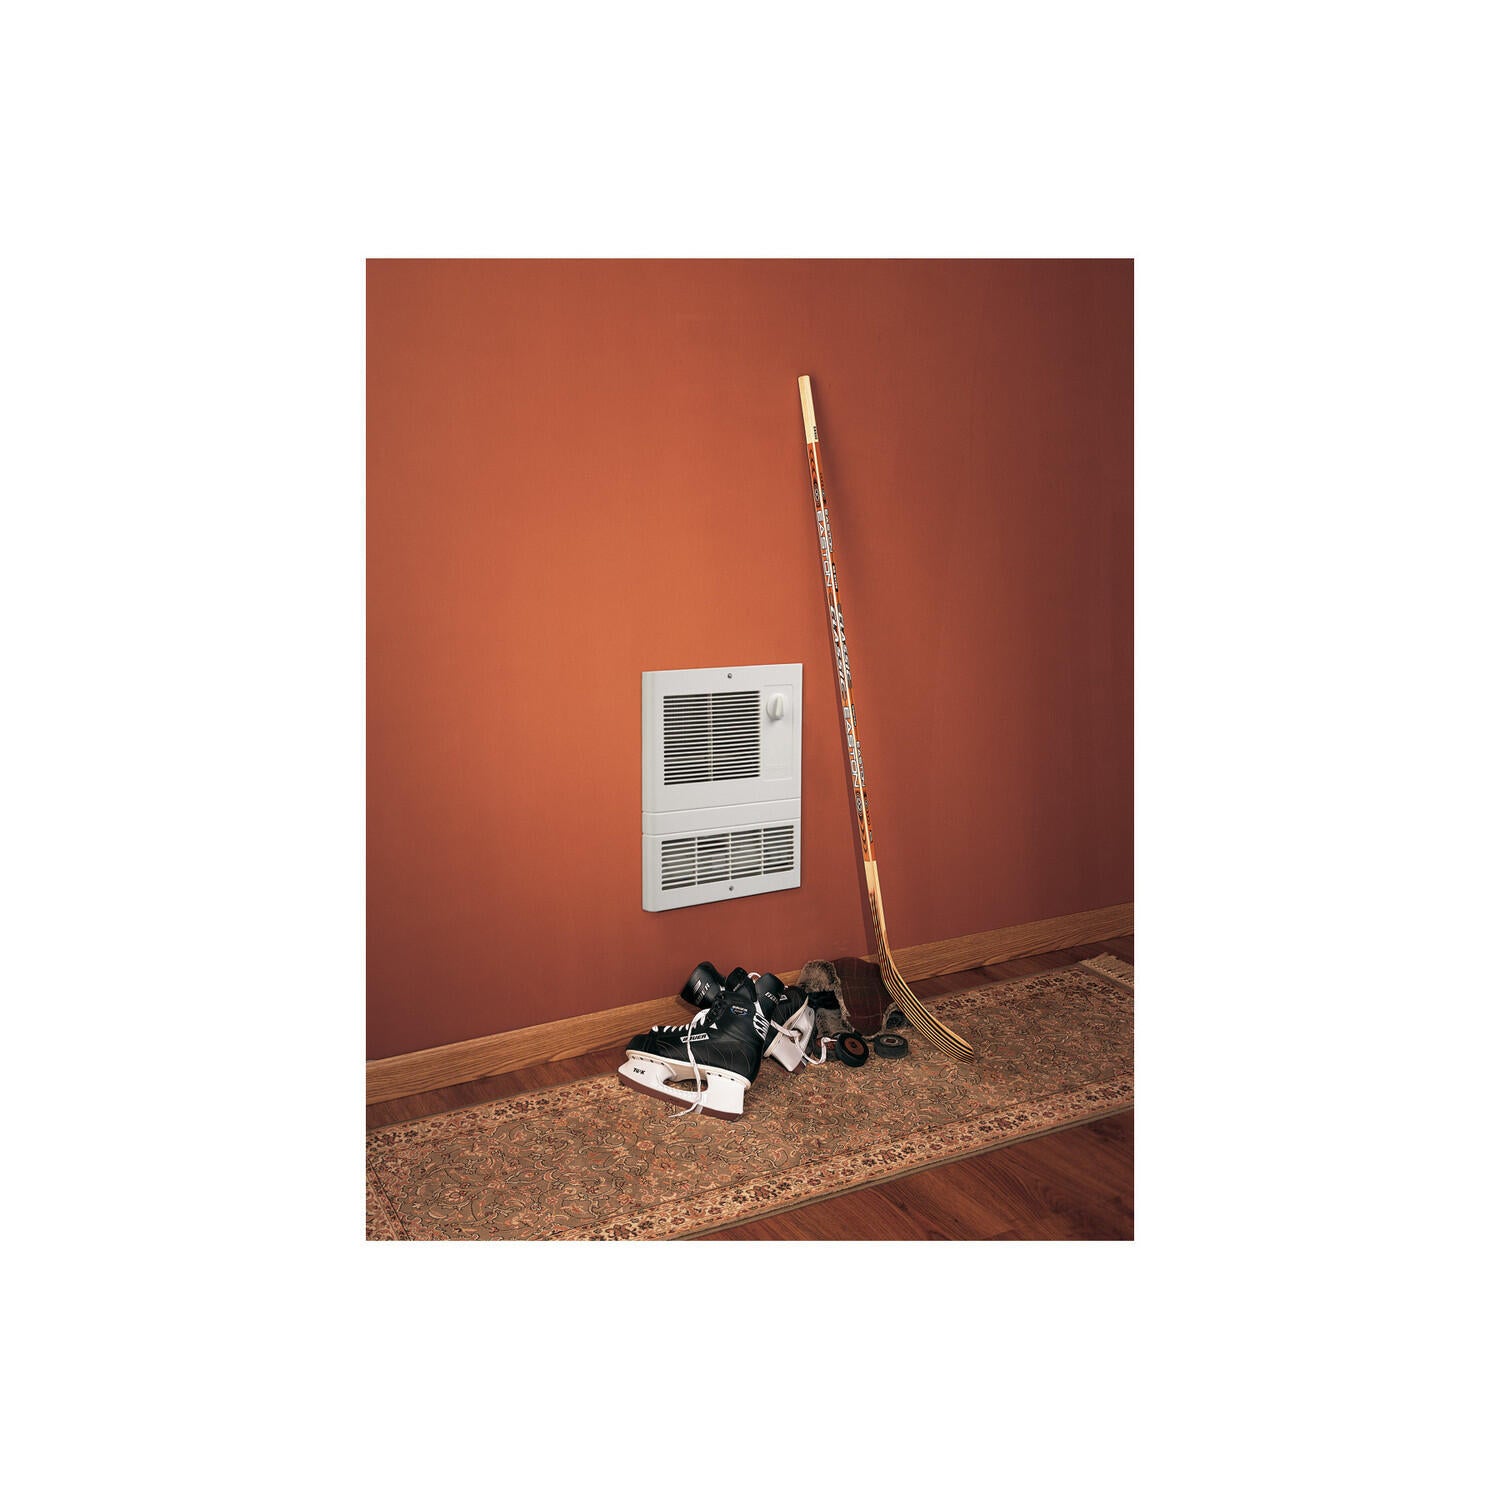 Broan 9810WH Broan® Wall Heater, High-Capacity, 1000W Heater, 120/240V